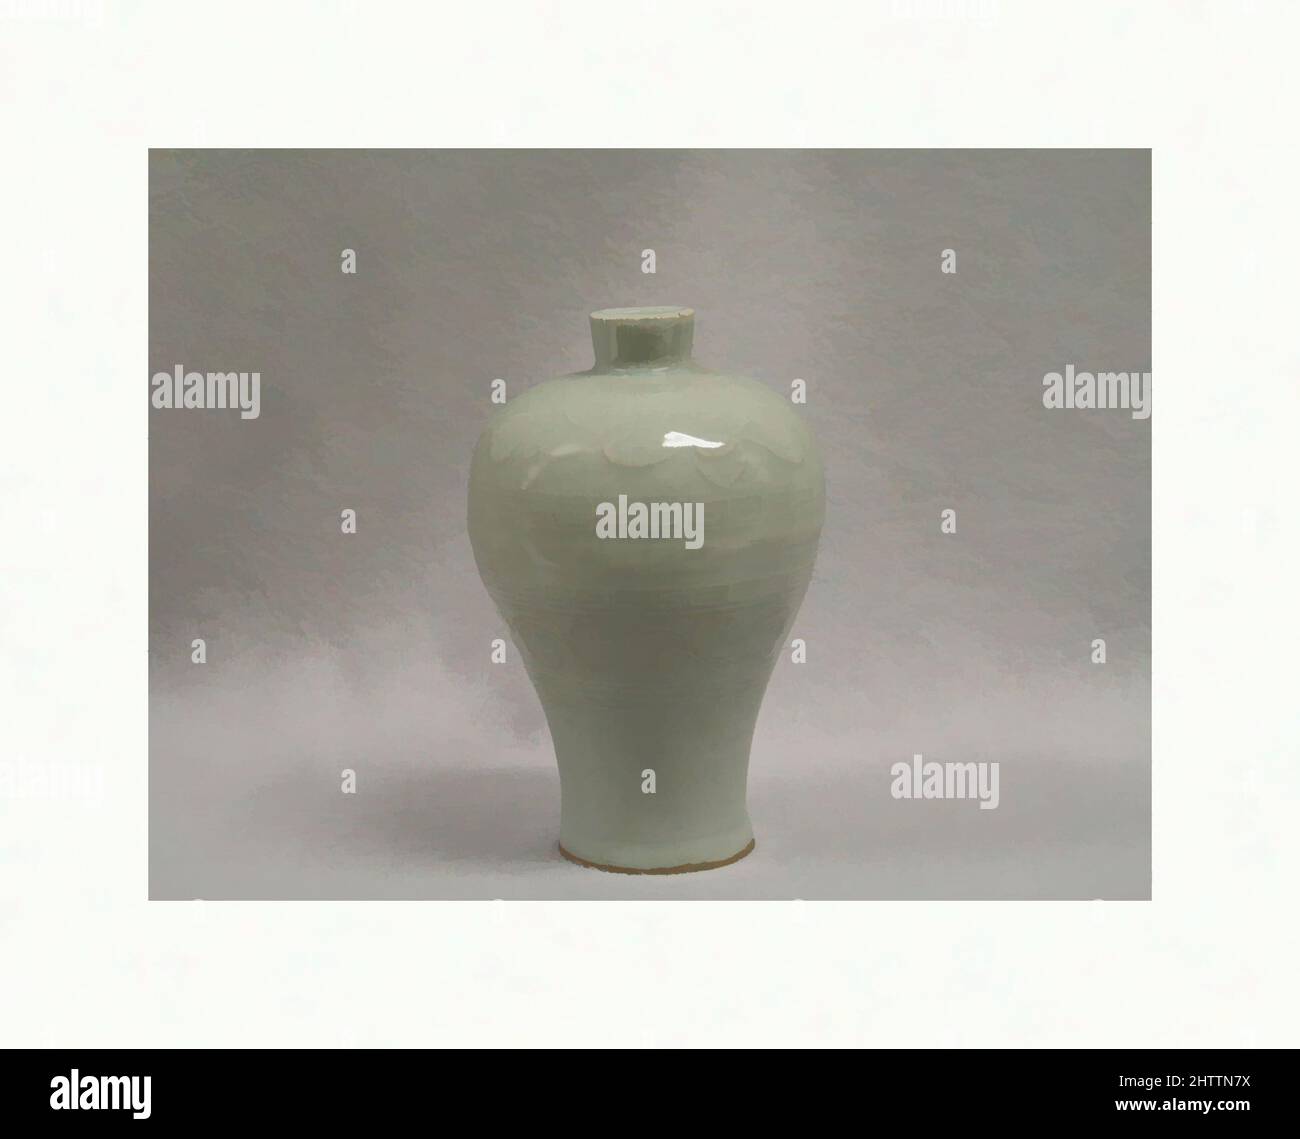 Art inspired by Vase, Ming dynasty (1368–1644), China, Porcelain with celadon glaze, H. 6 in. (15.2 cm), Ceramics, Classic works modernized by Artotop with a splash of modernity. Shapes, color and value, eye-catching visual impact on art. Emotions through freedom of artworks in a contemporary way. A timeless message pursuing a wildly creative new direction. Artists turning to the digital medium and creating the Artotop NFT Stock Photo